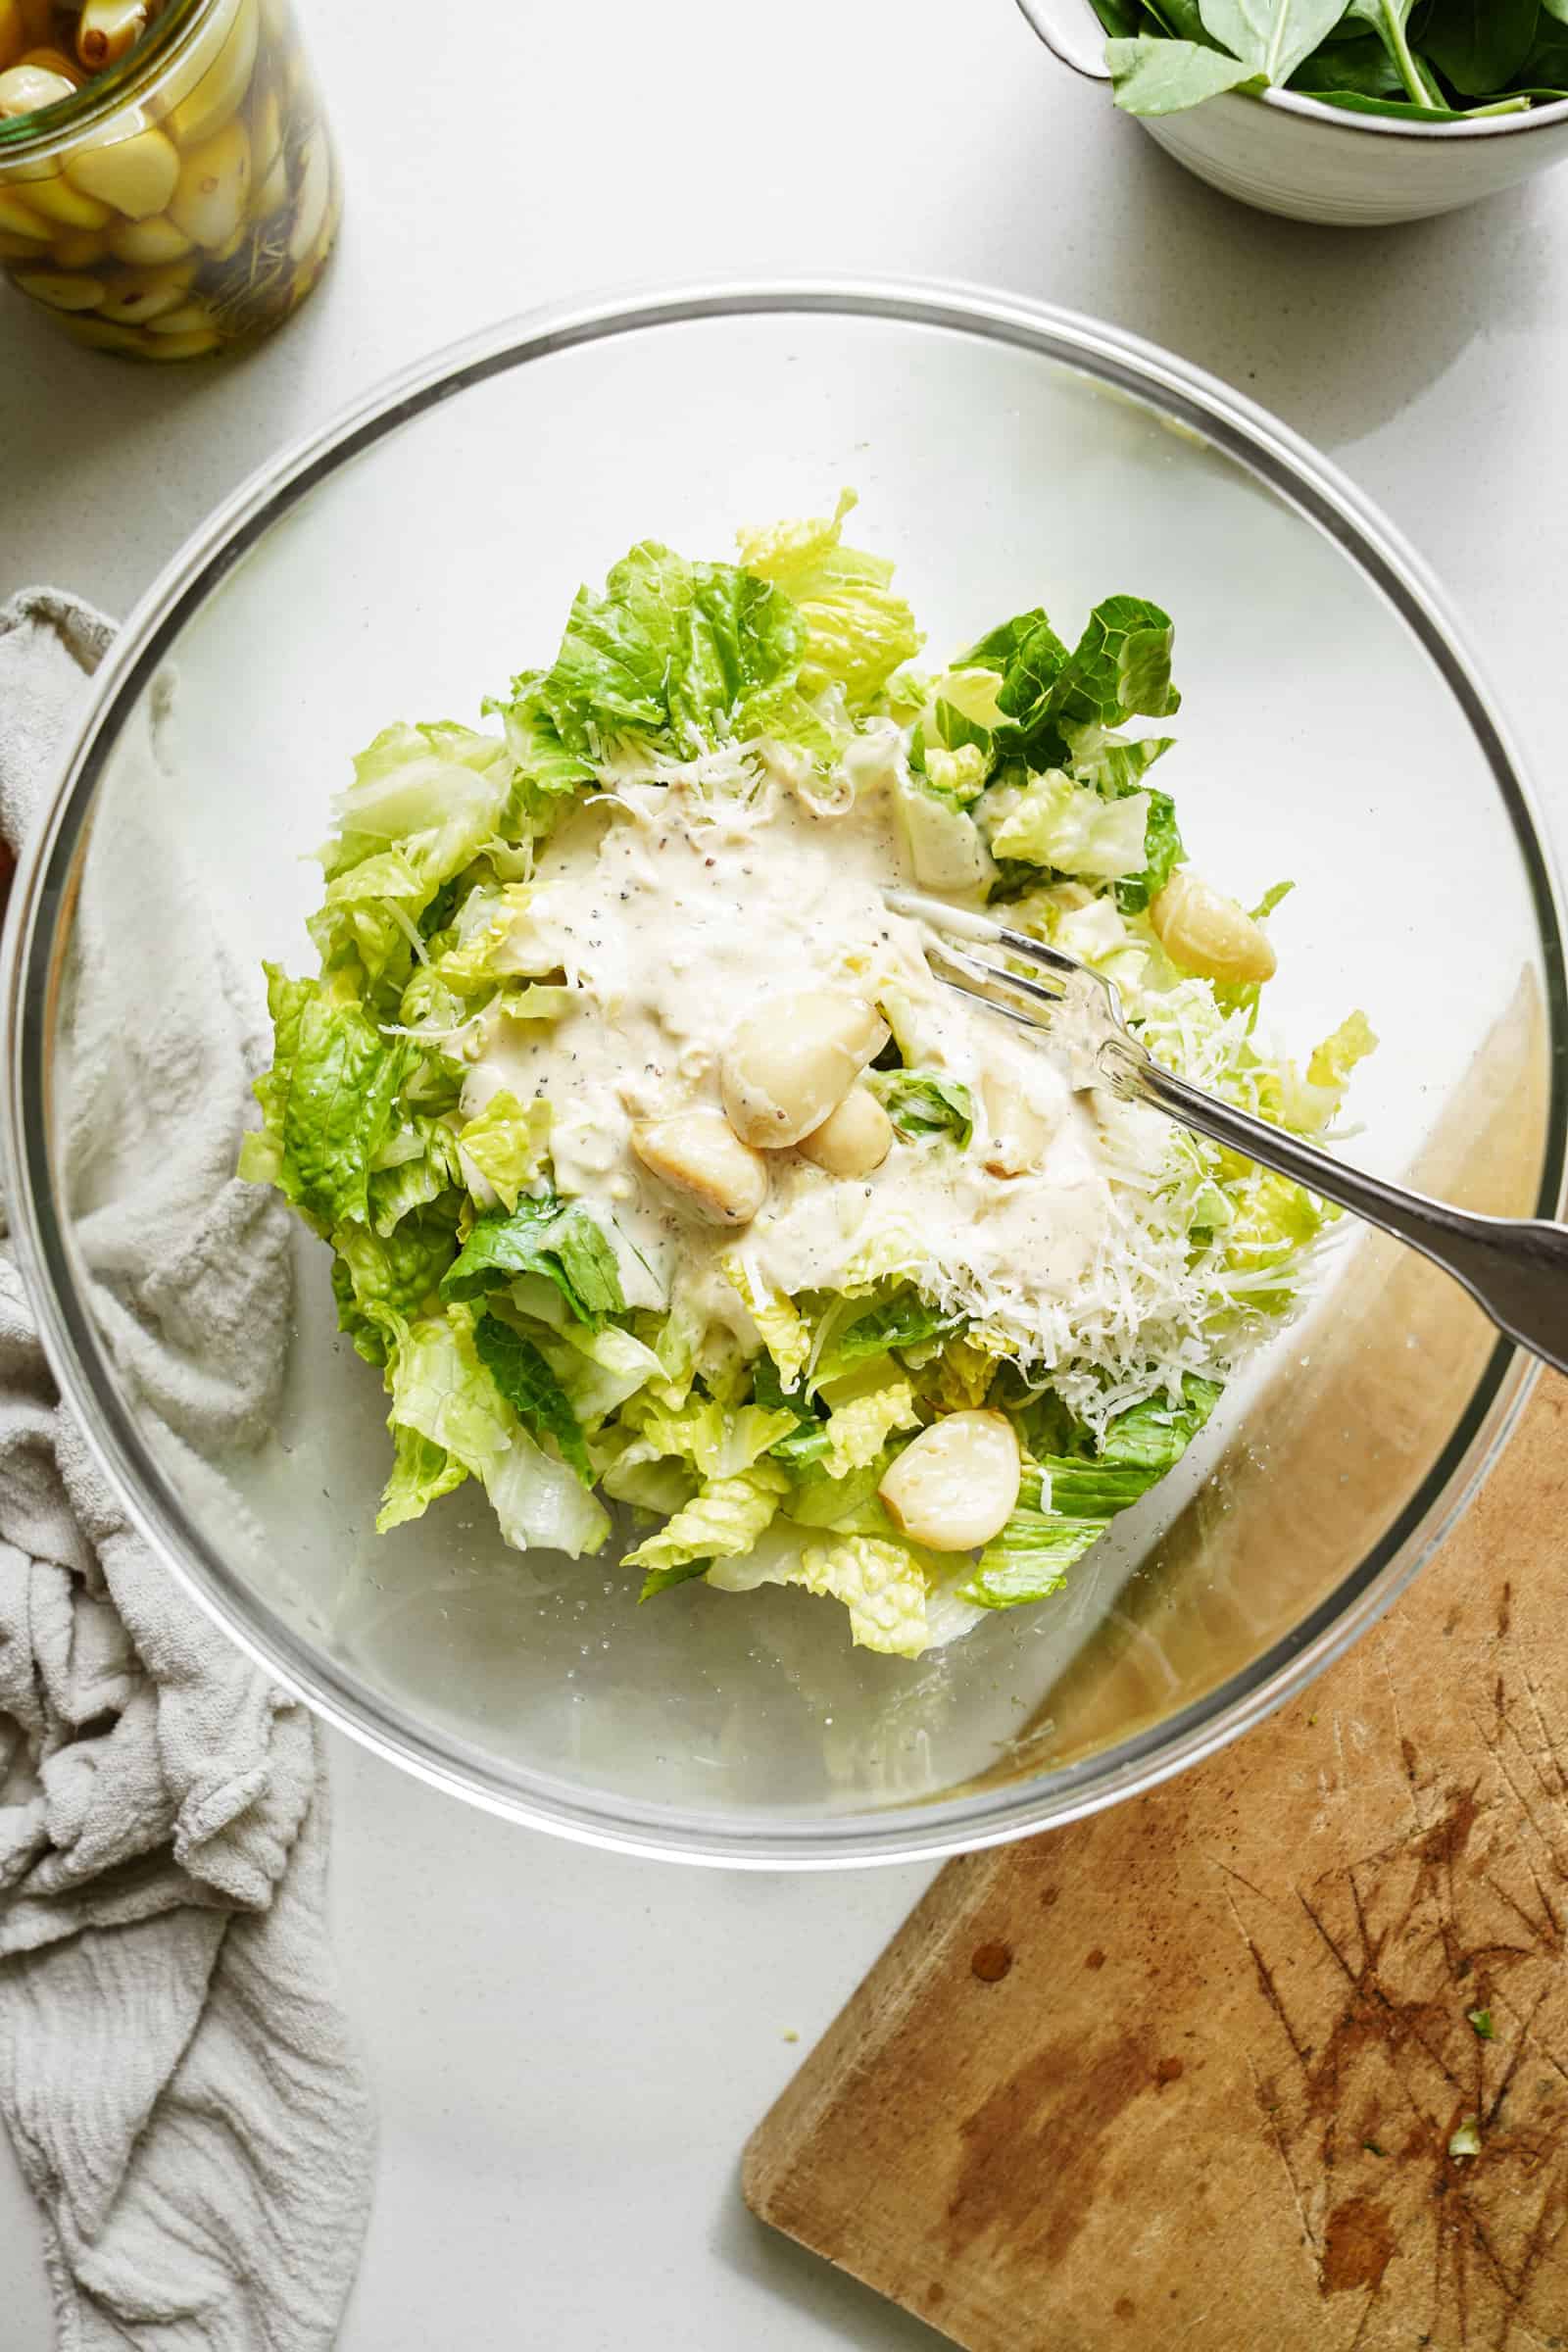 Lettuce and ingredients for chickpea caesar salad